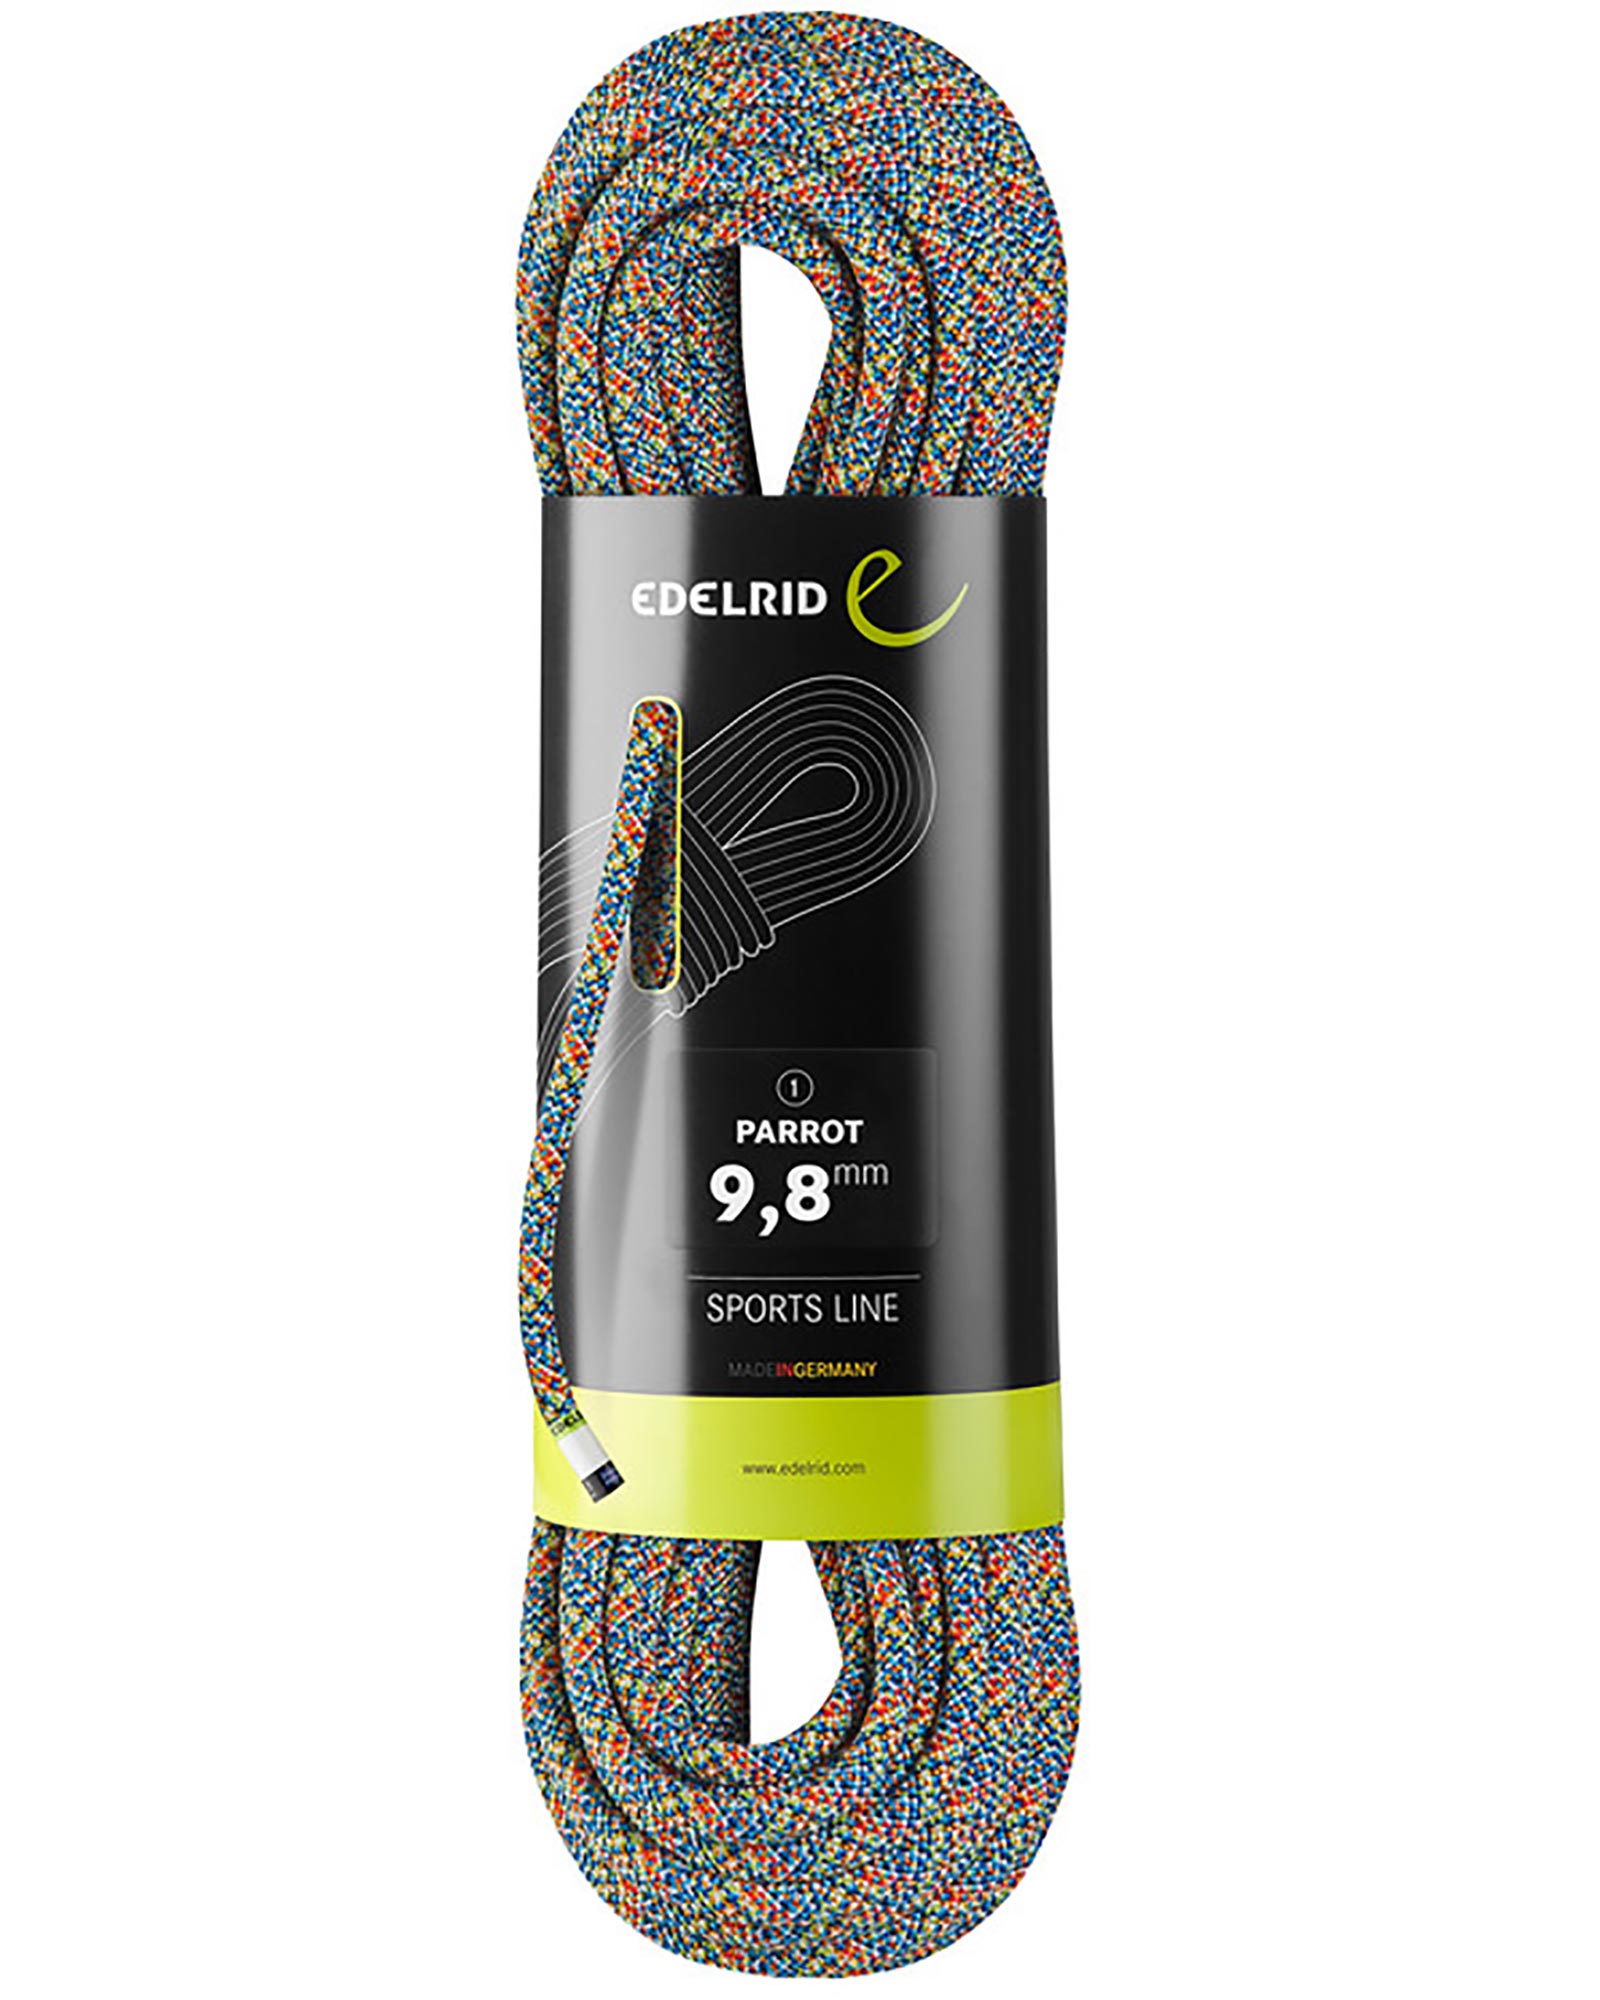 Edelrid Parrot 9.8mm x 50m Rope 0